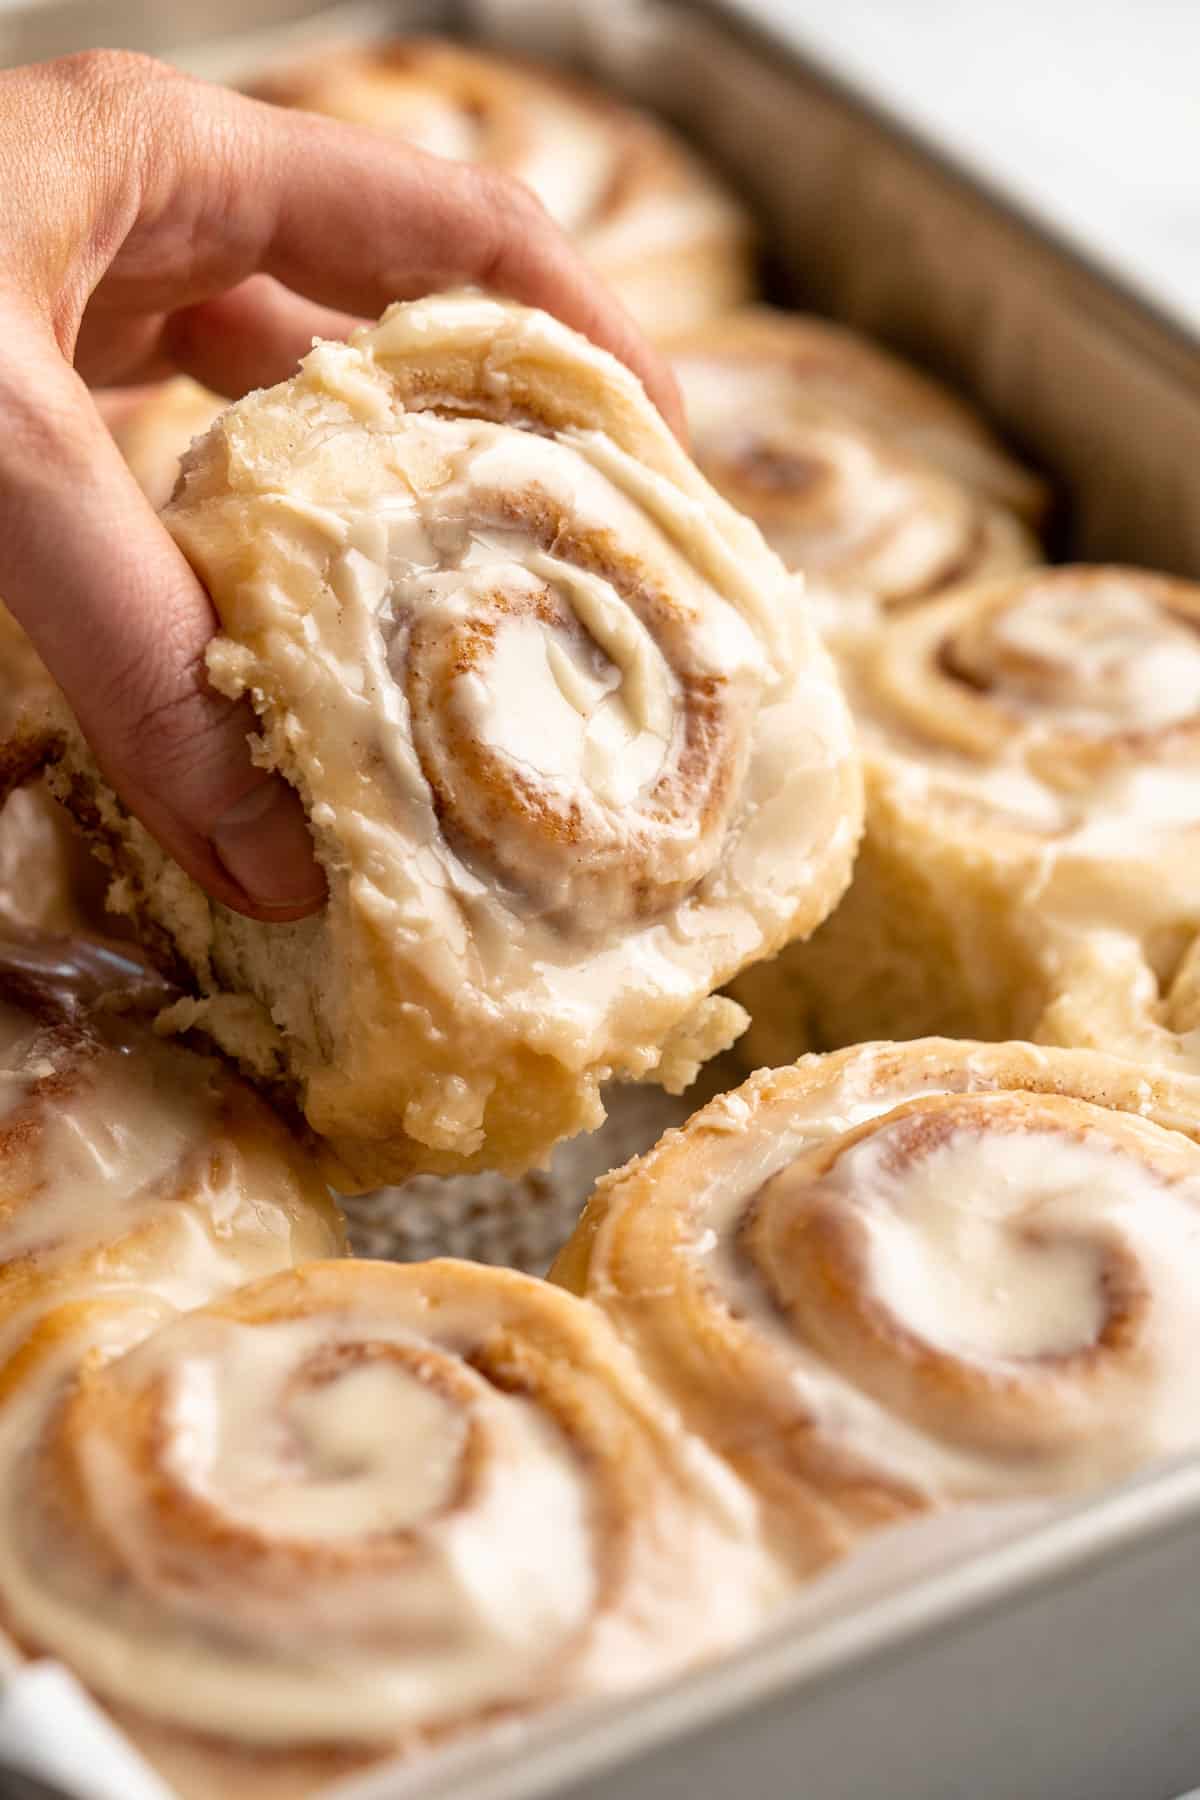 Pulling an iced cinnamon roll out of a baking pan.